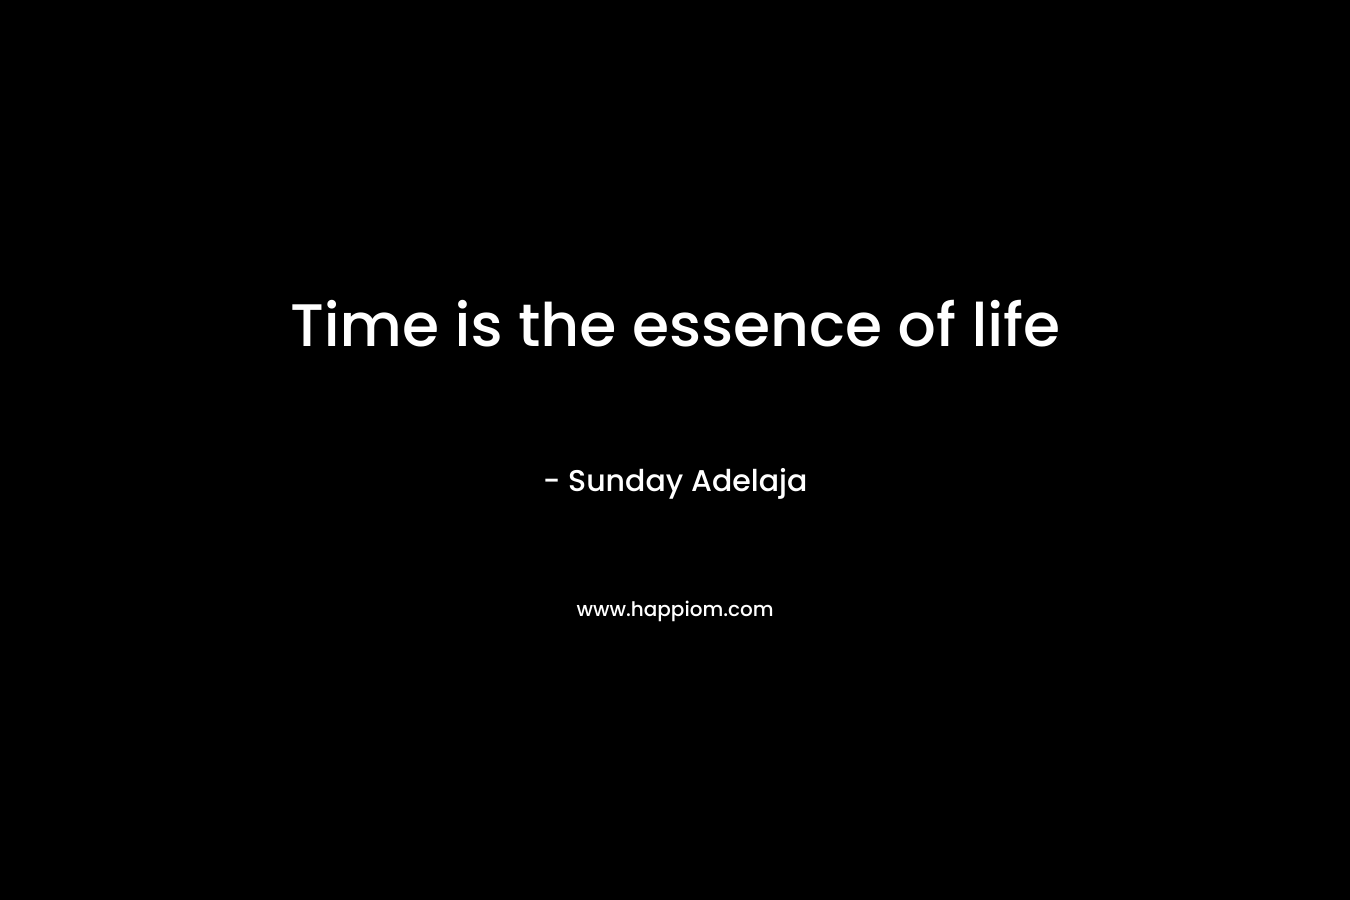 Time is the essence of life